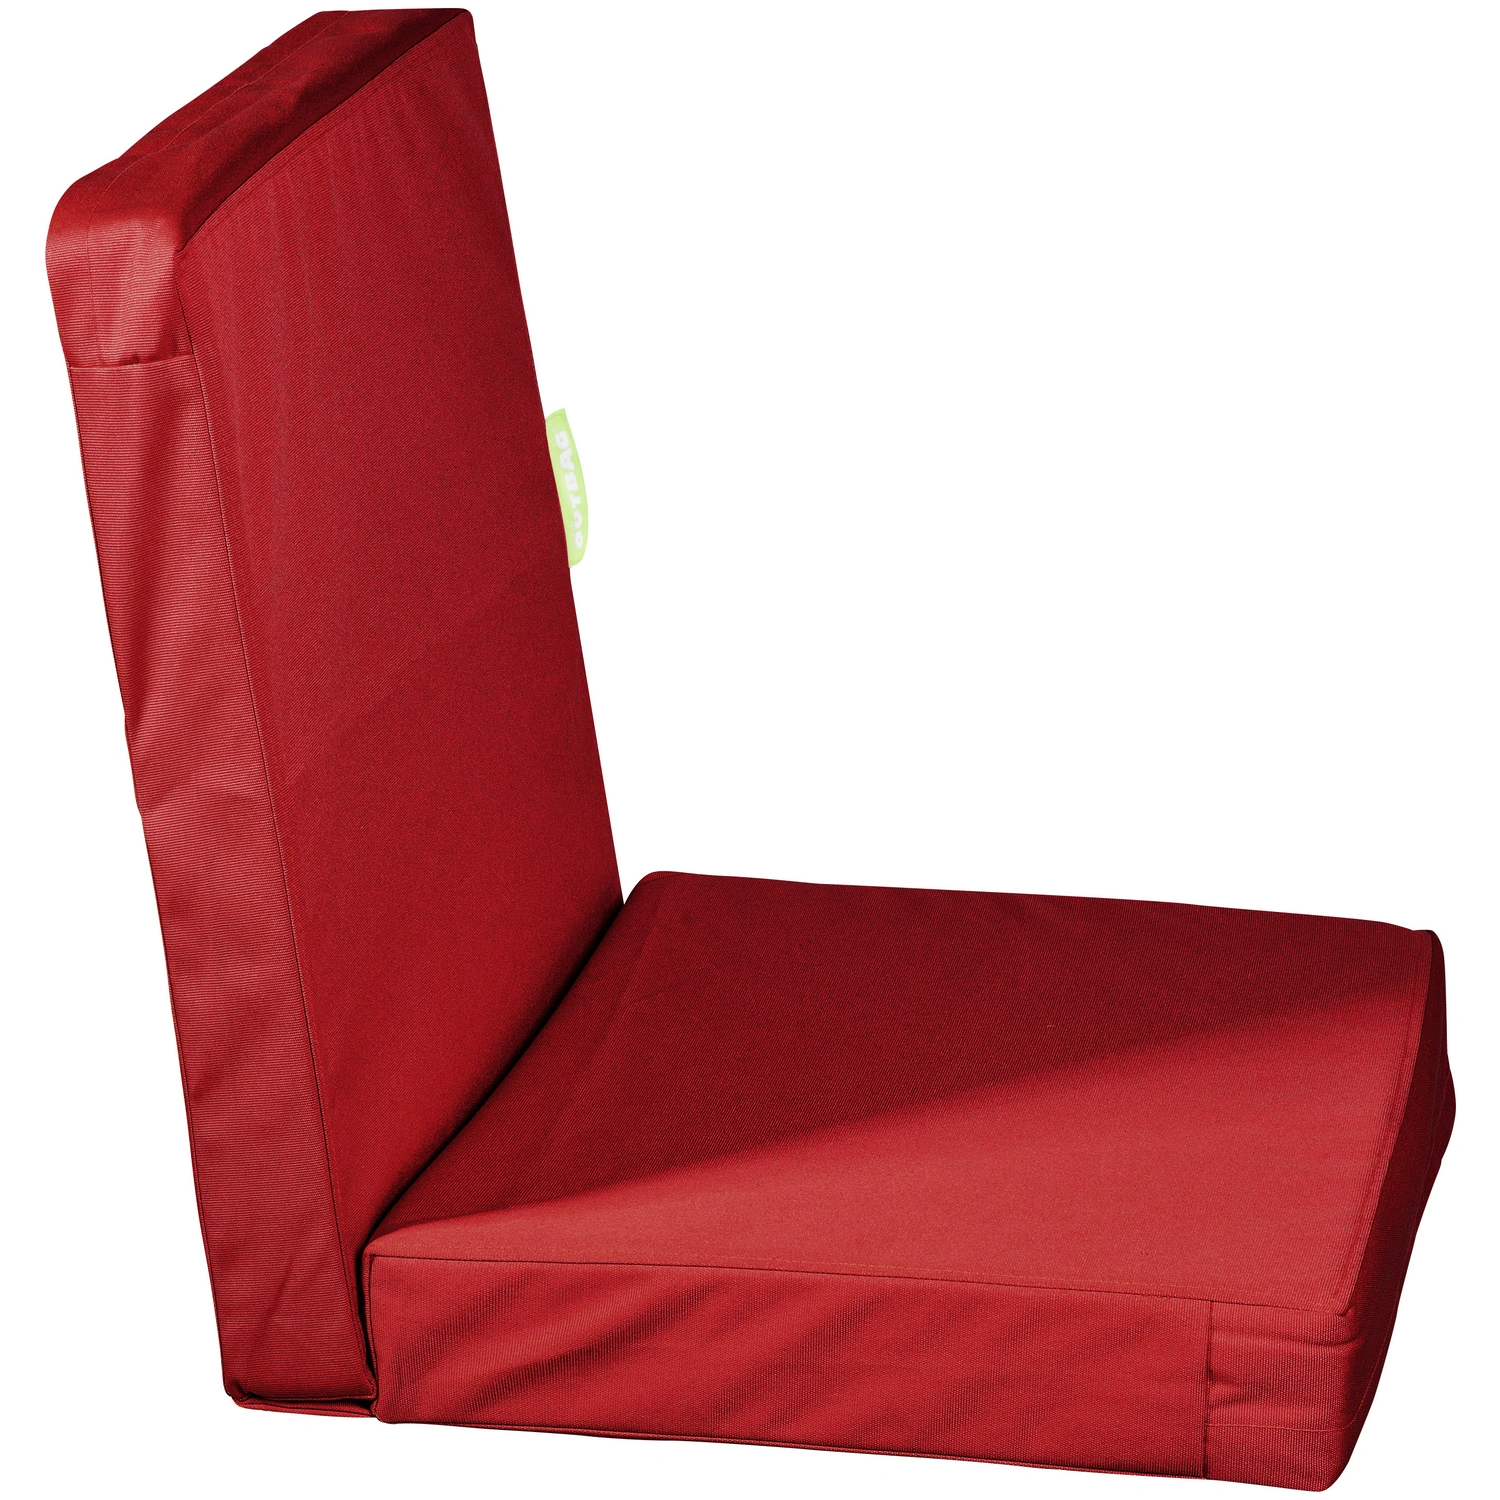 50 cm »HighRise OUTBAG Plus«, rot, x 105 Sesselauflage BxL: